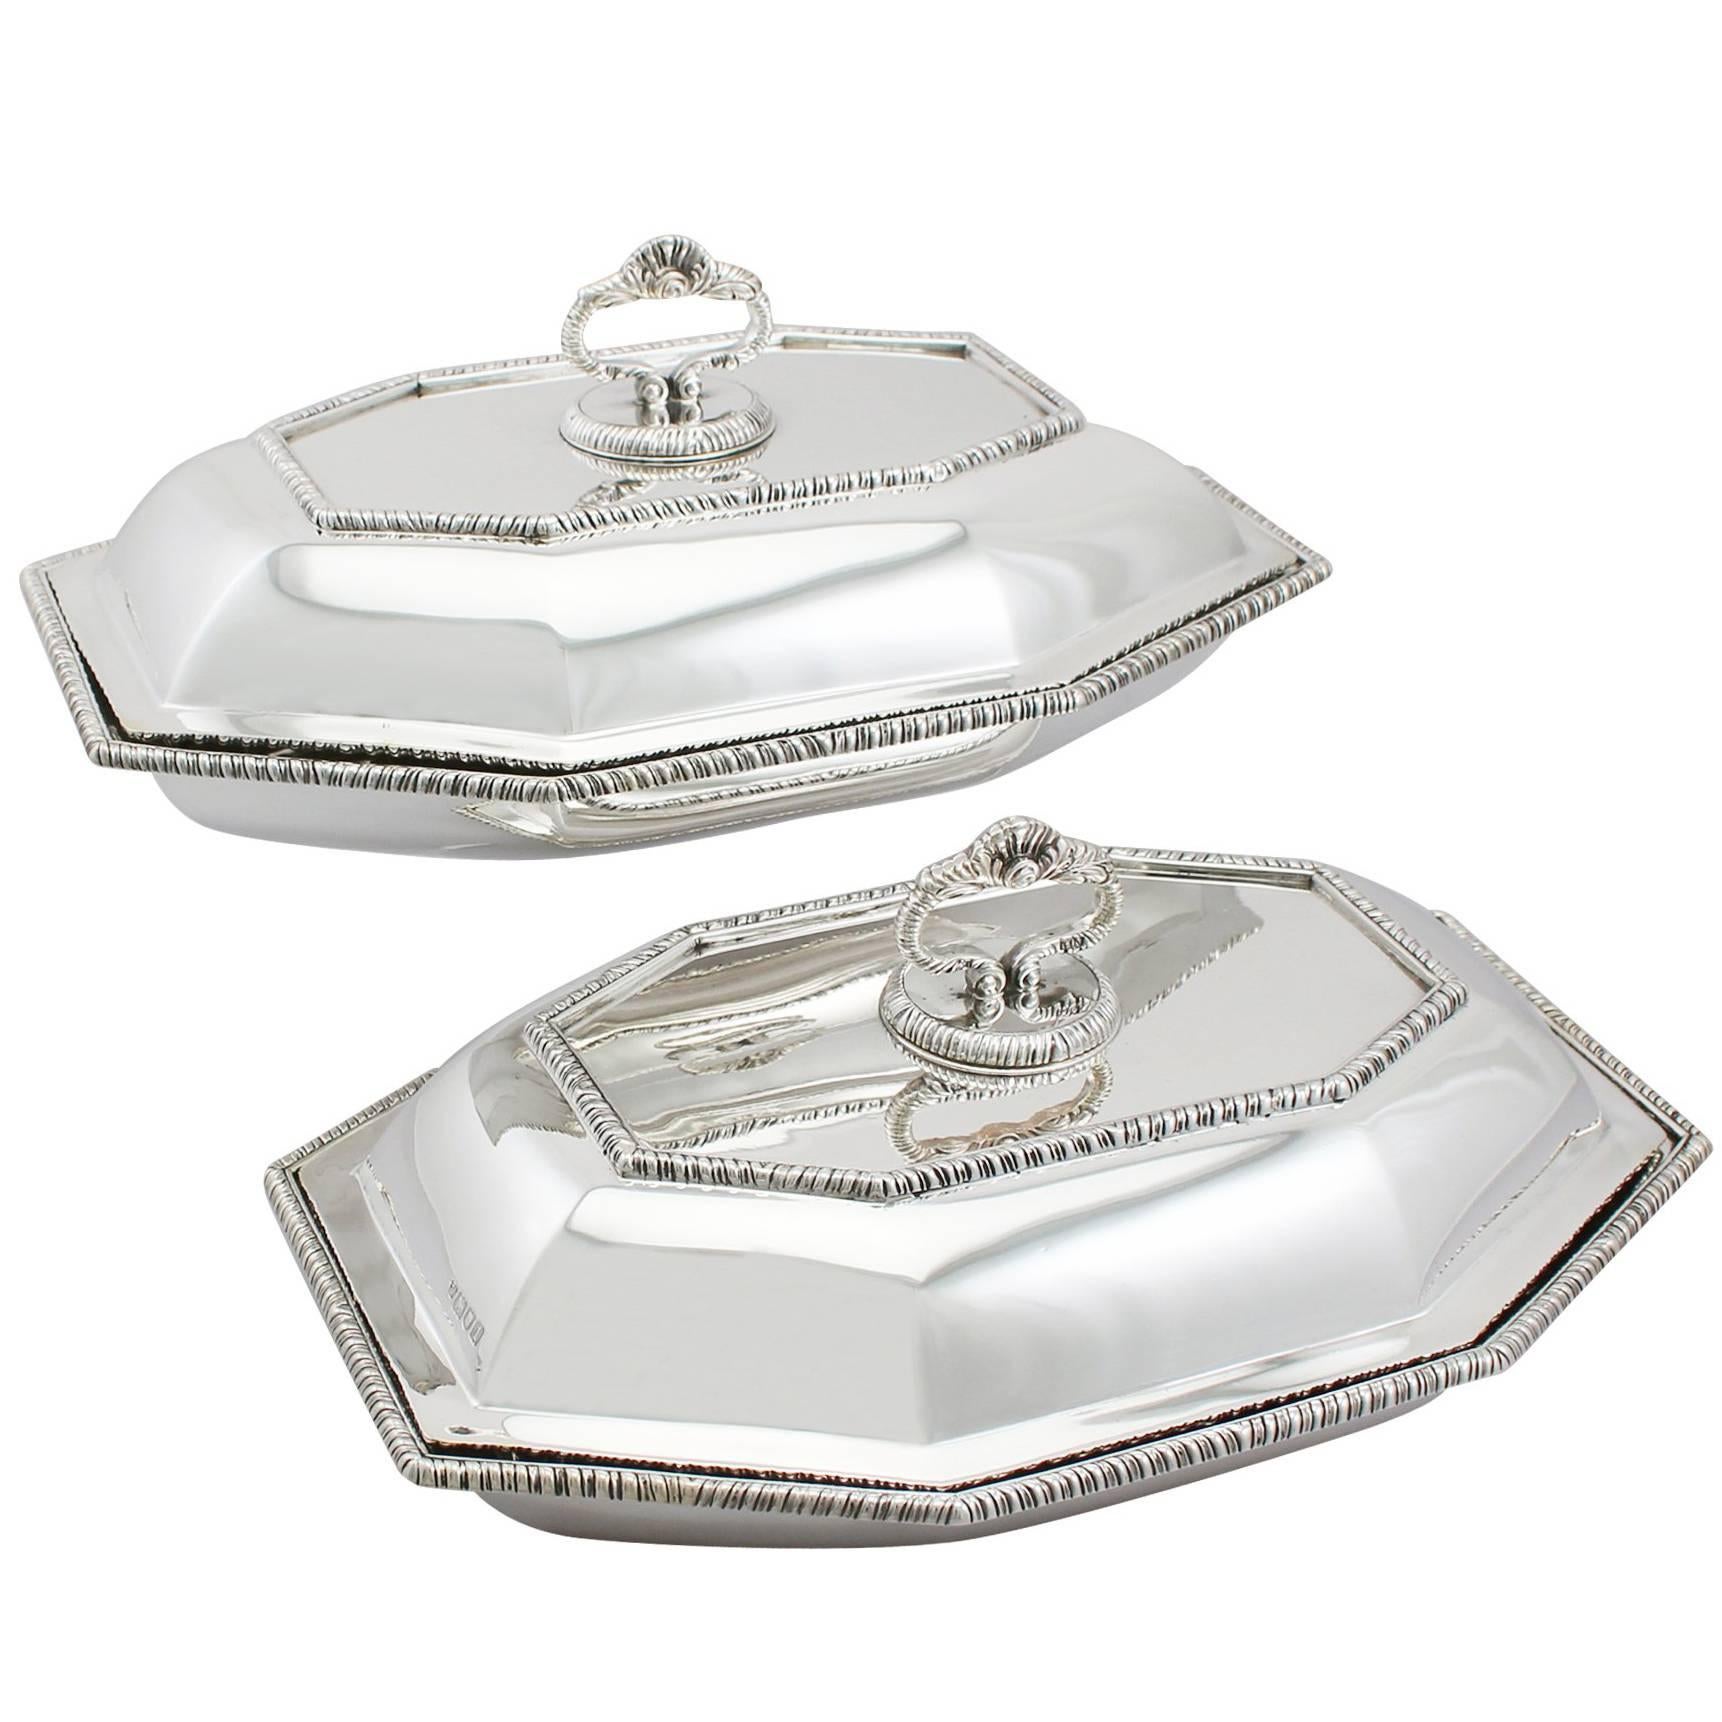 1900s Edwardian Pair of Sterling Silver Entree Dishes